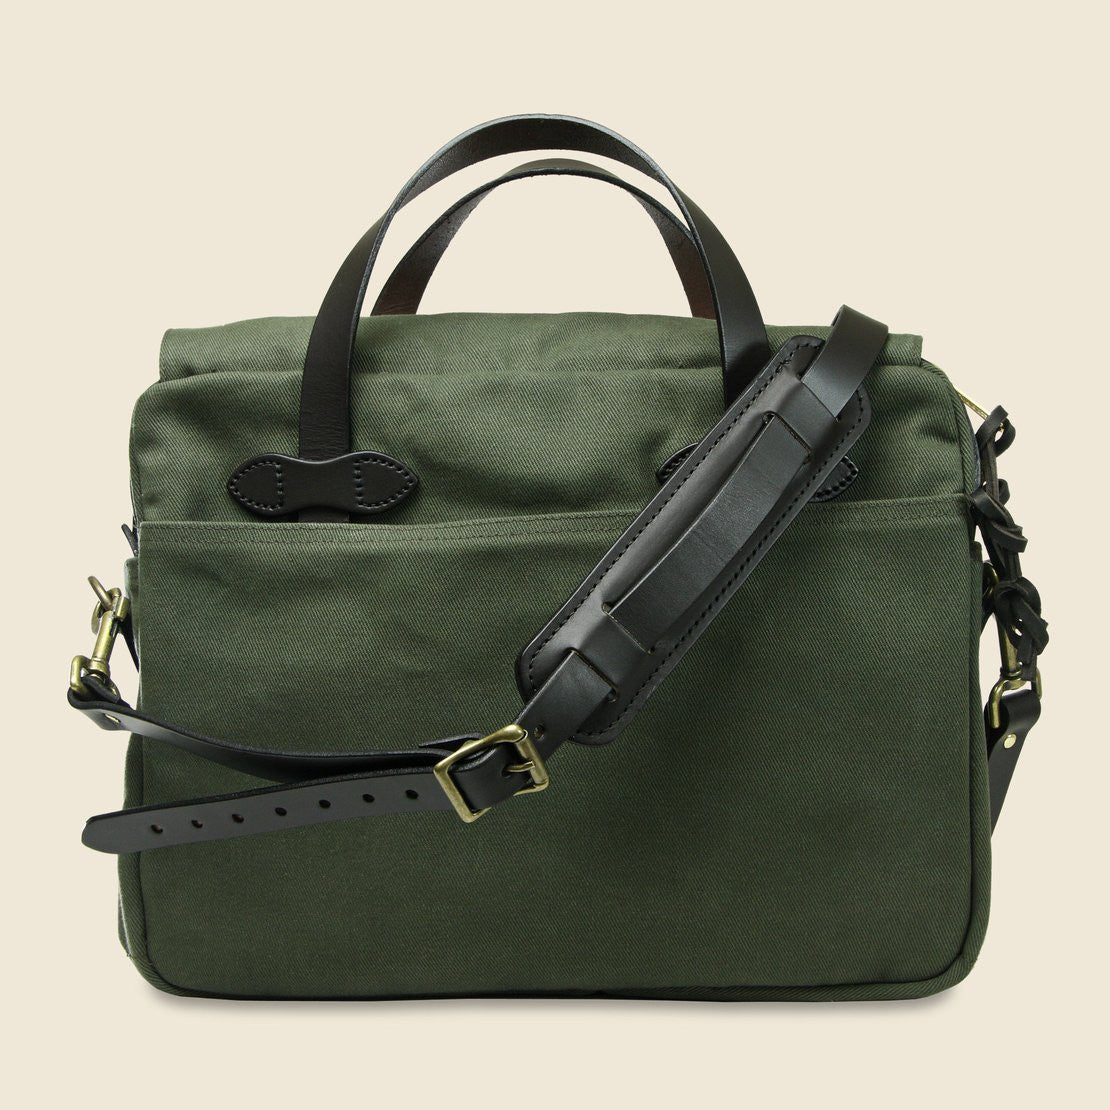 Original Briefcase - Otter Green - Filson - STAG Provisions - Accessories - Bags / Luggage